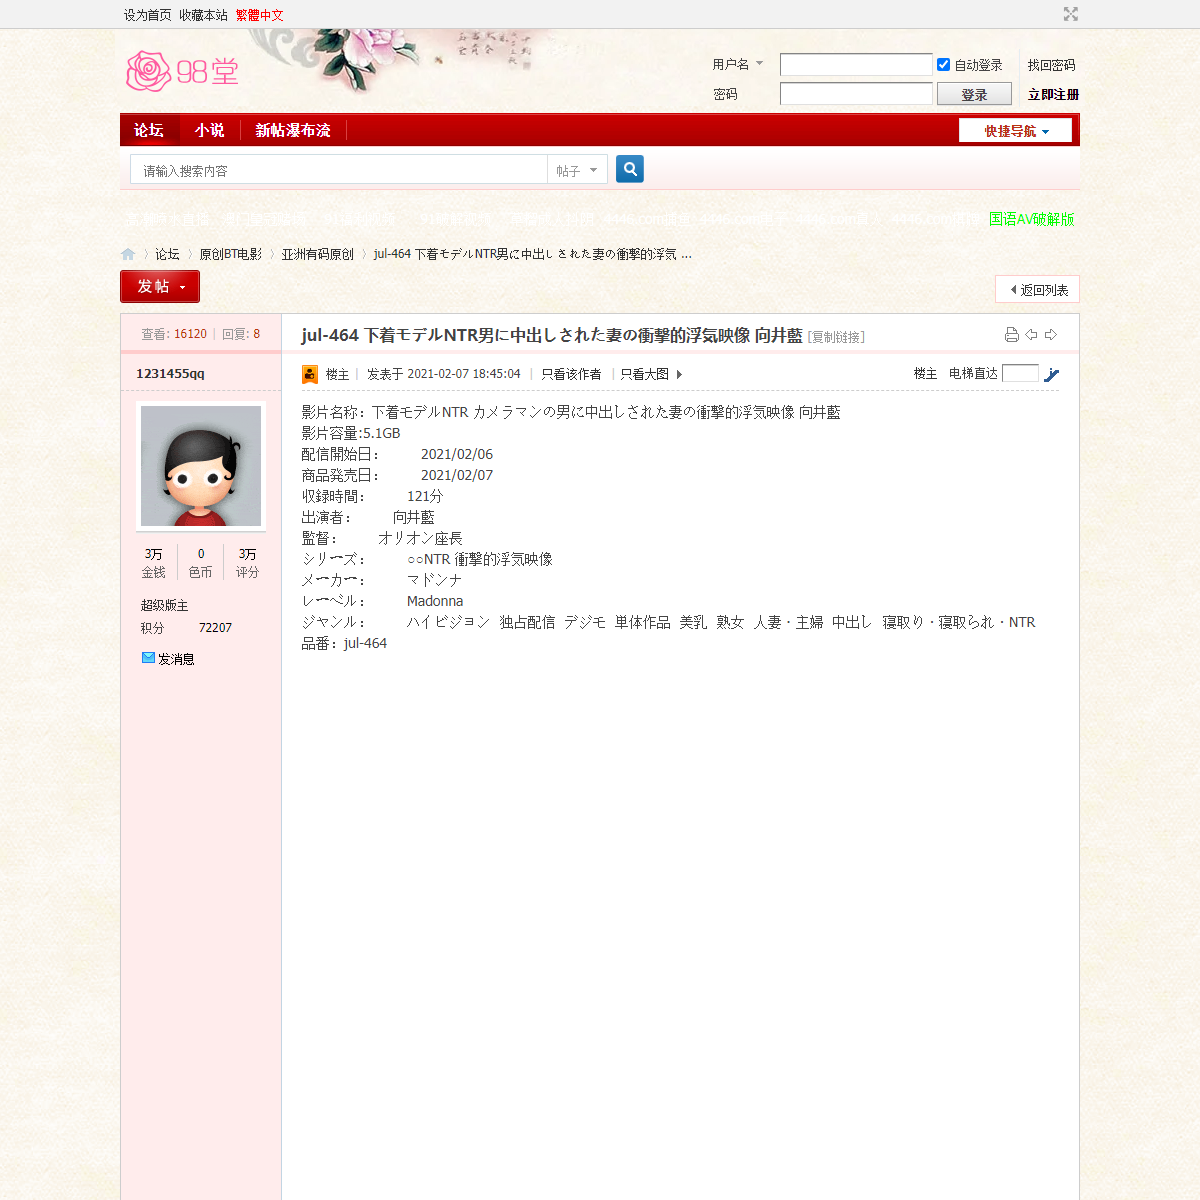 A complete backup of https://www.sehuatang.net/thread-477288-1-1.html